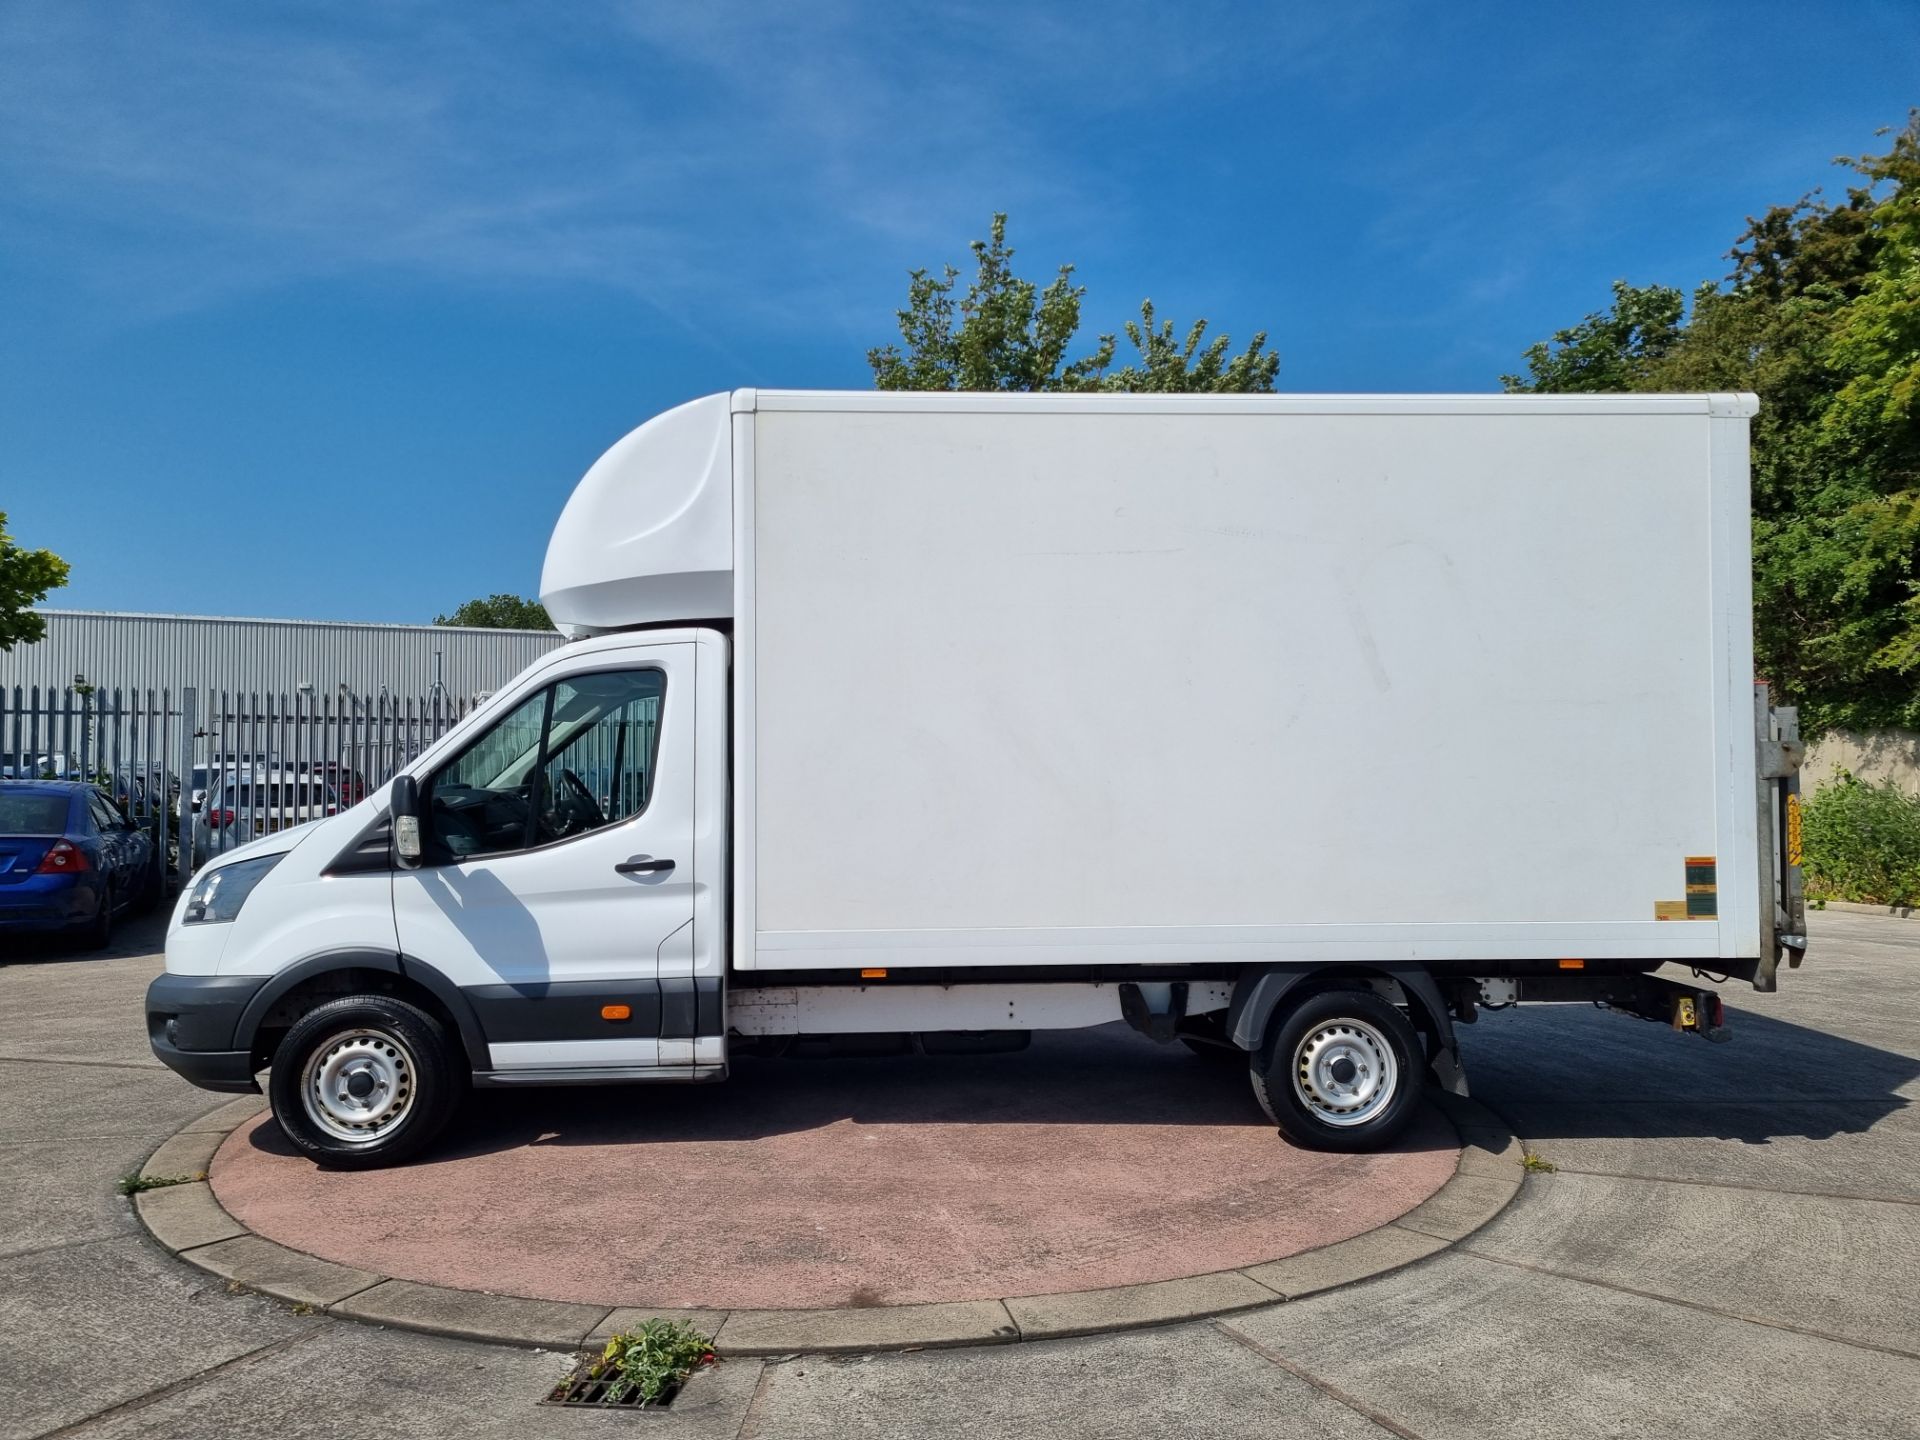 2018 Transit Luton with tail lift - Image 3 of 13